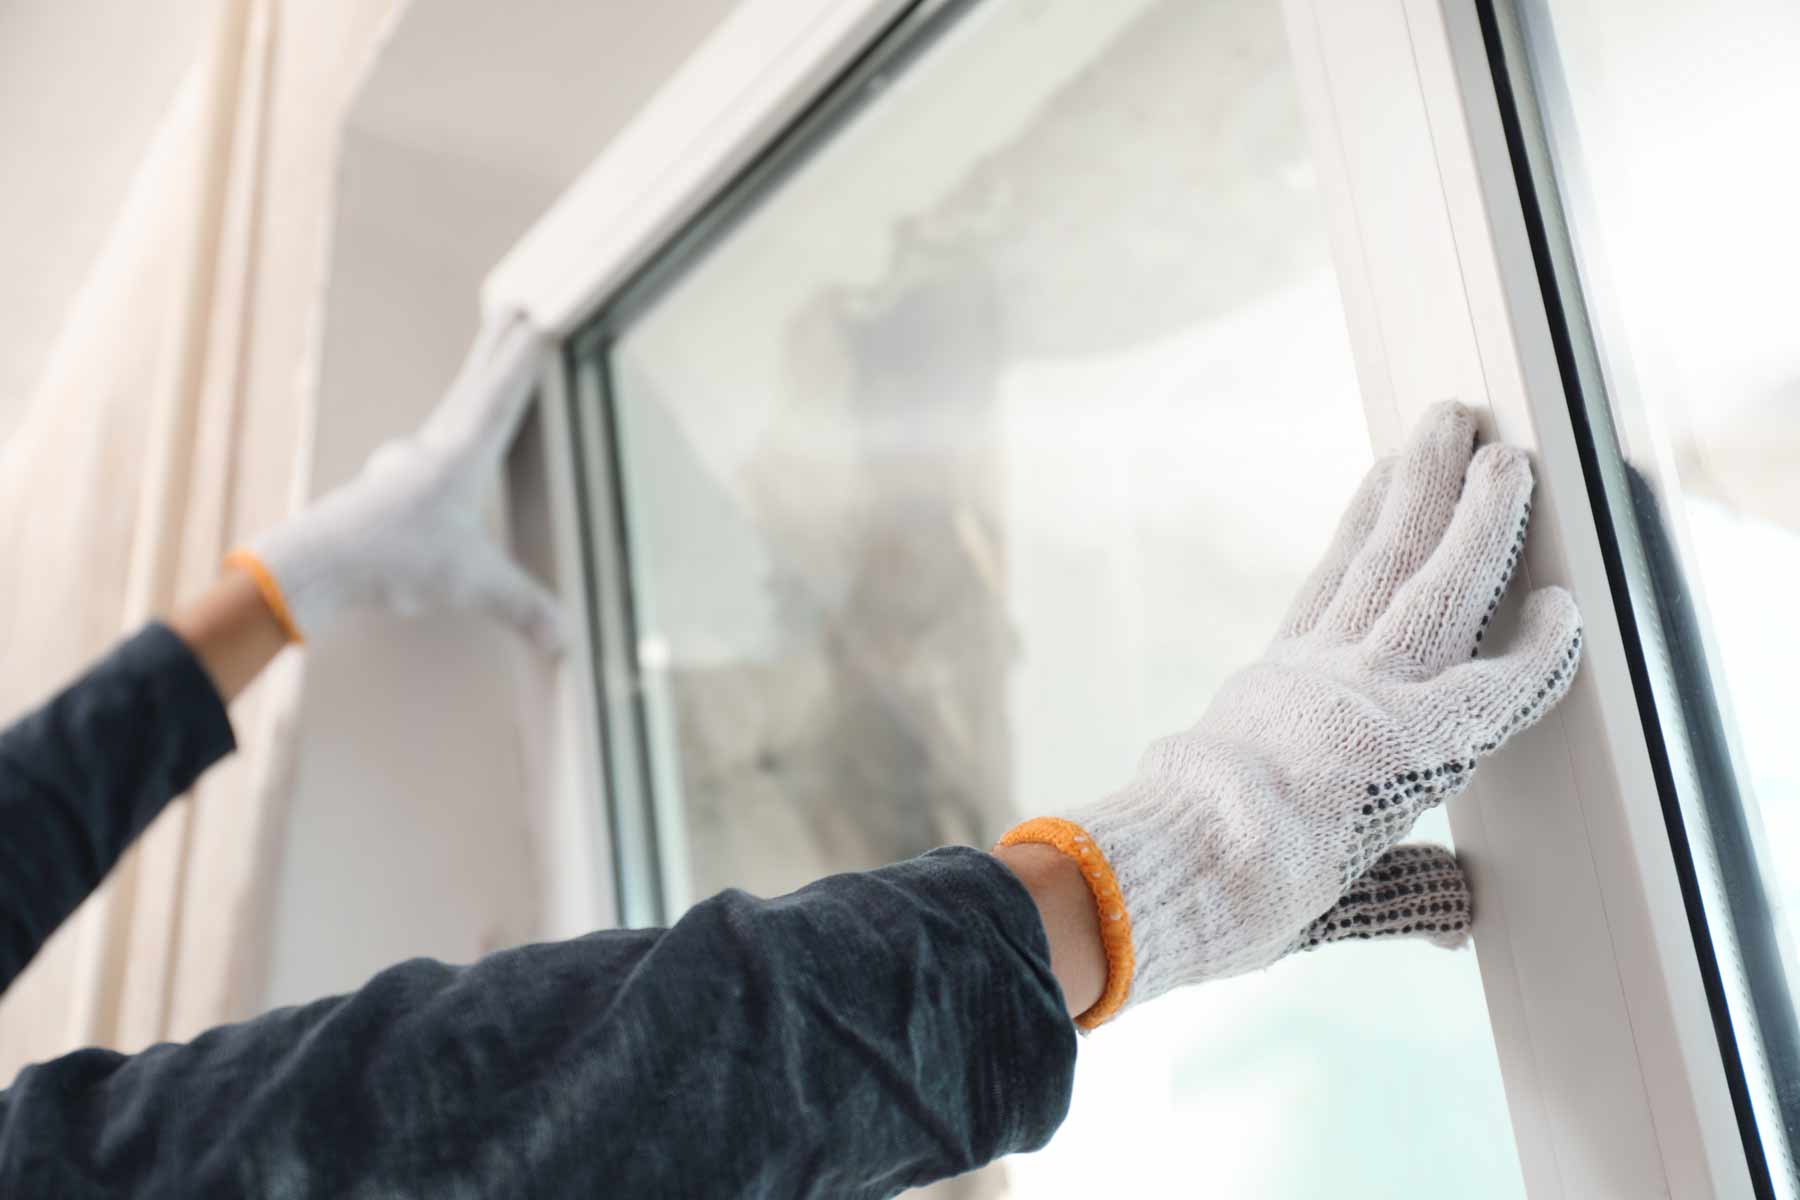 a person wearing gloves and holding a window